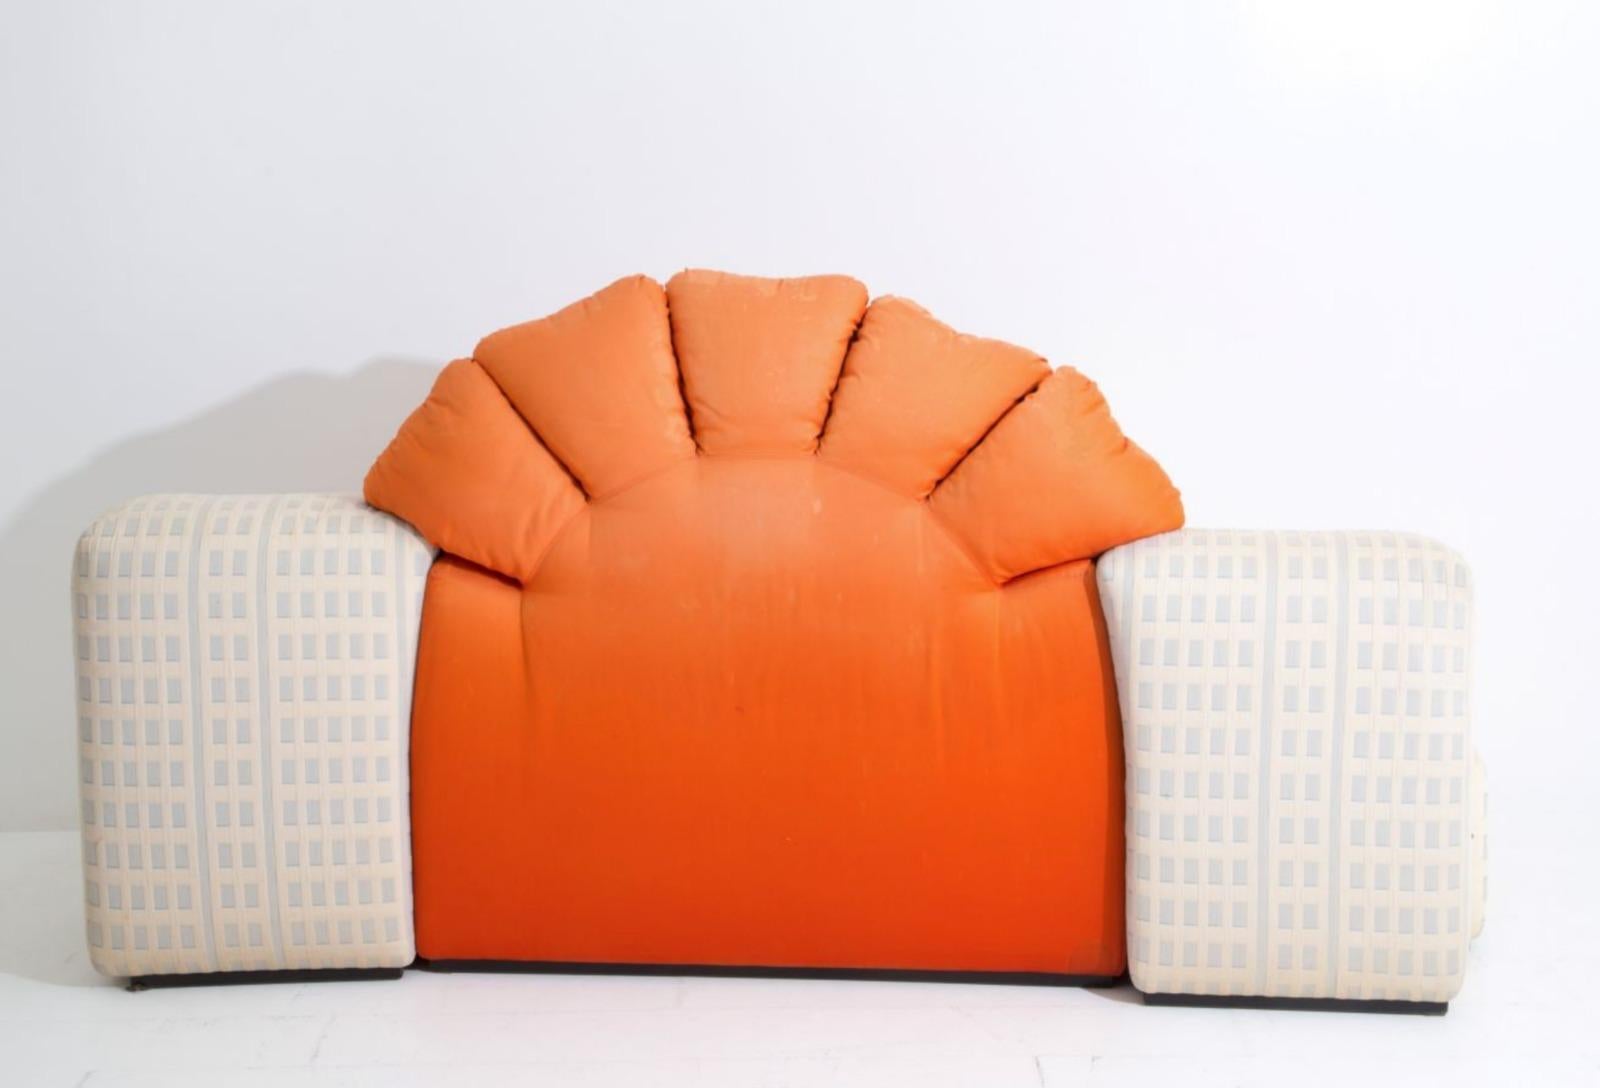 Hand-Crafted Sunset in New York - Vintage Sofa by Gaetano Pesce, Italy, 1980s